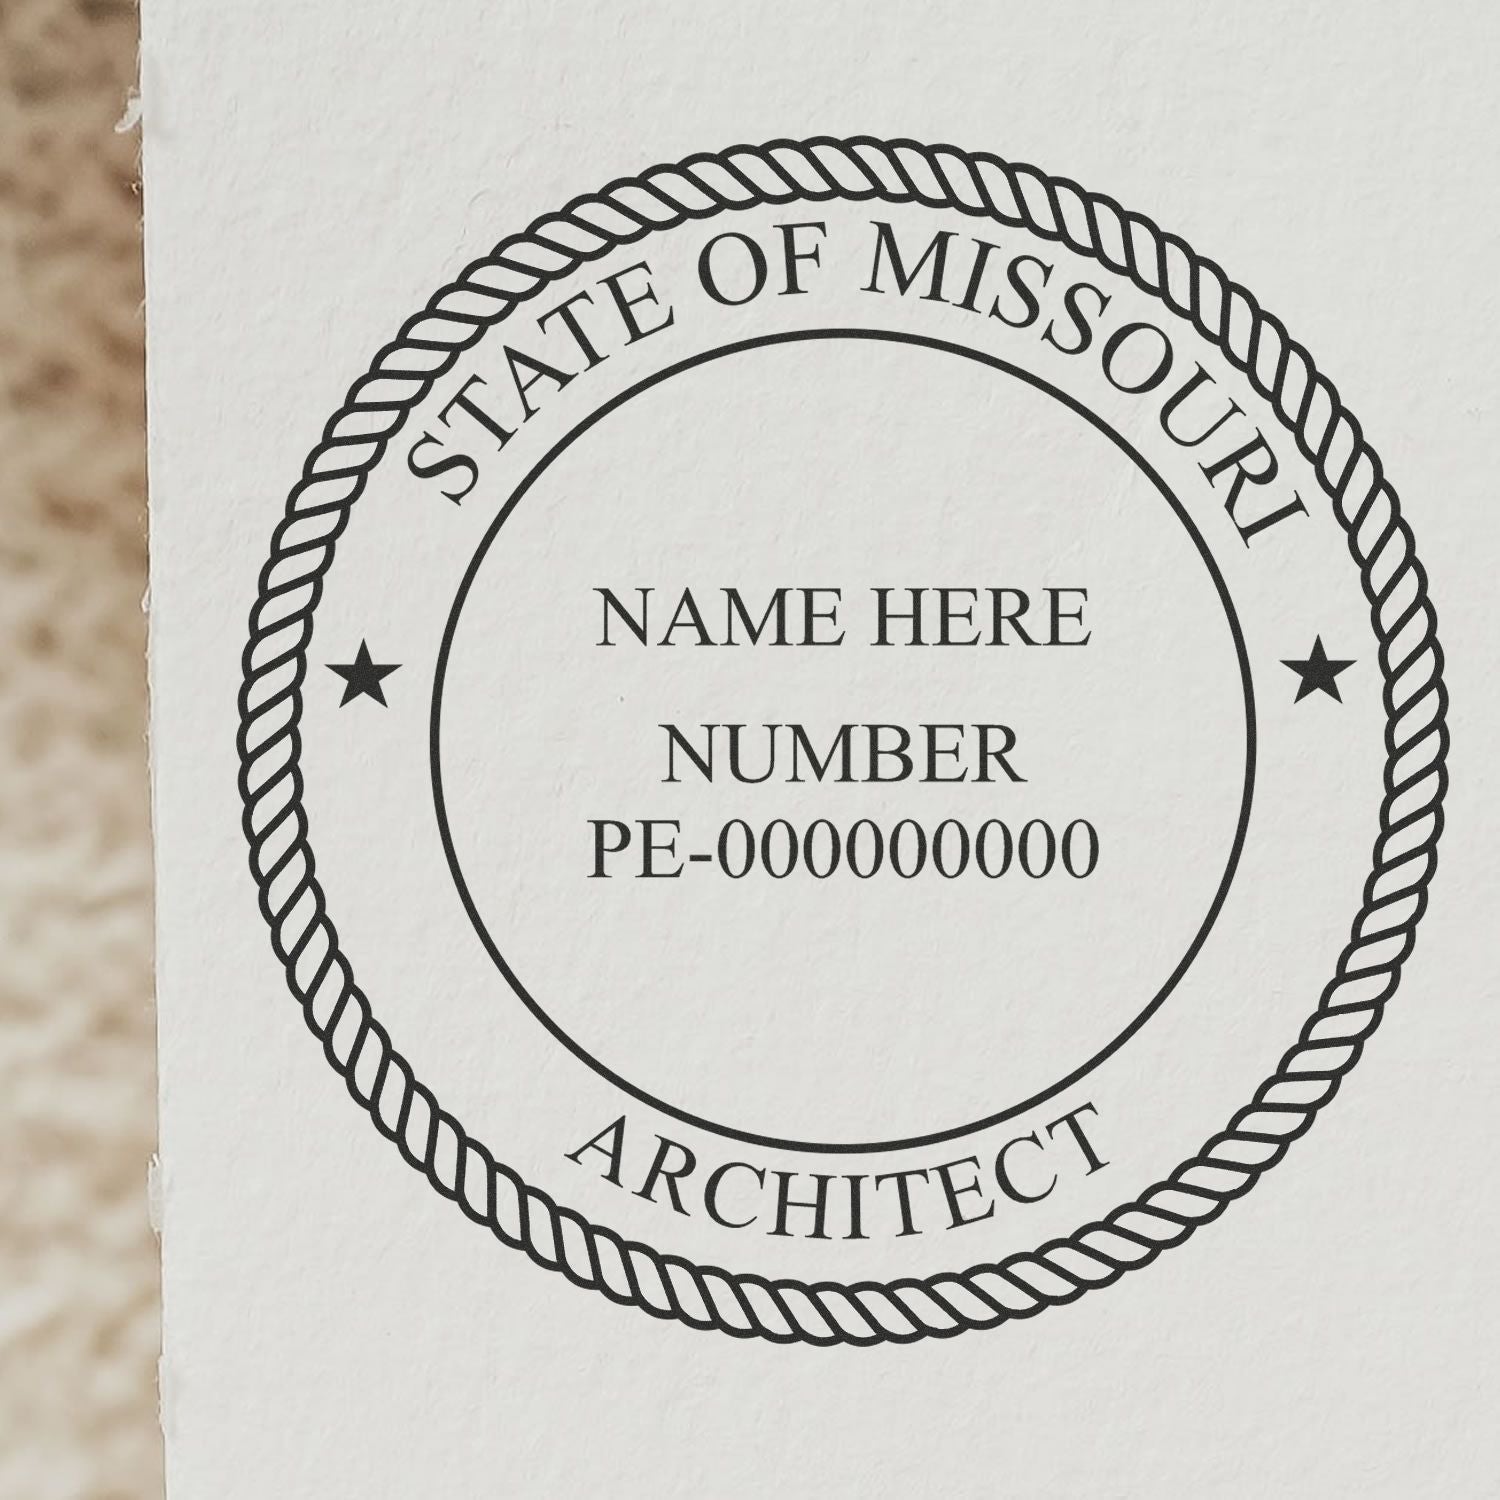 Slim Pre-Inked Missouri Architect Seal Stamp in use photo showing a stamped imprint of the Slim Pre-Inked Missouri Architect Seal Stamp